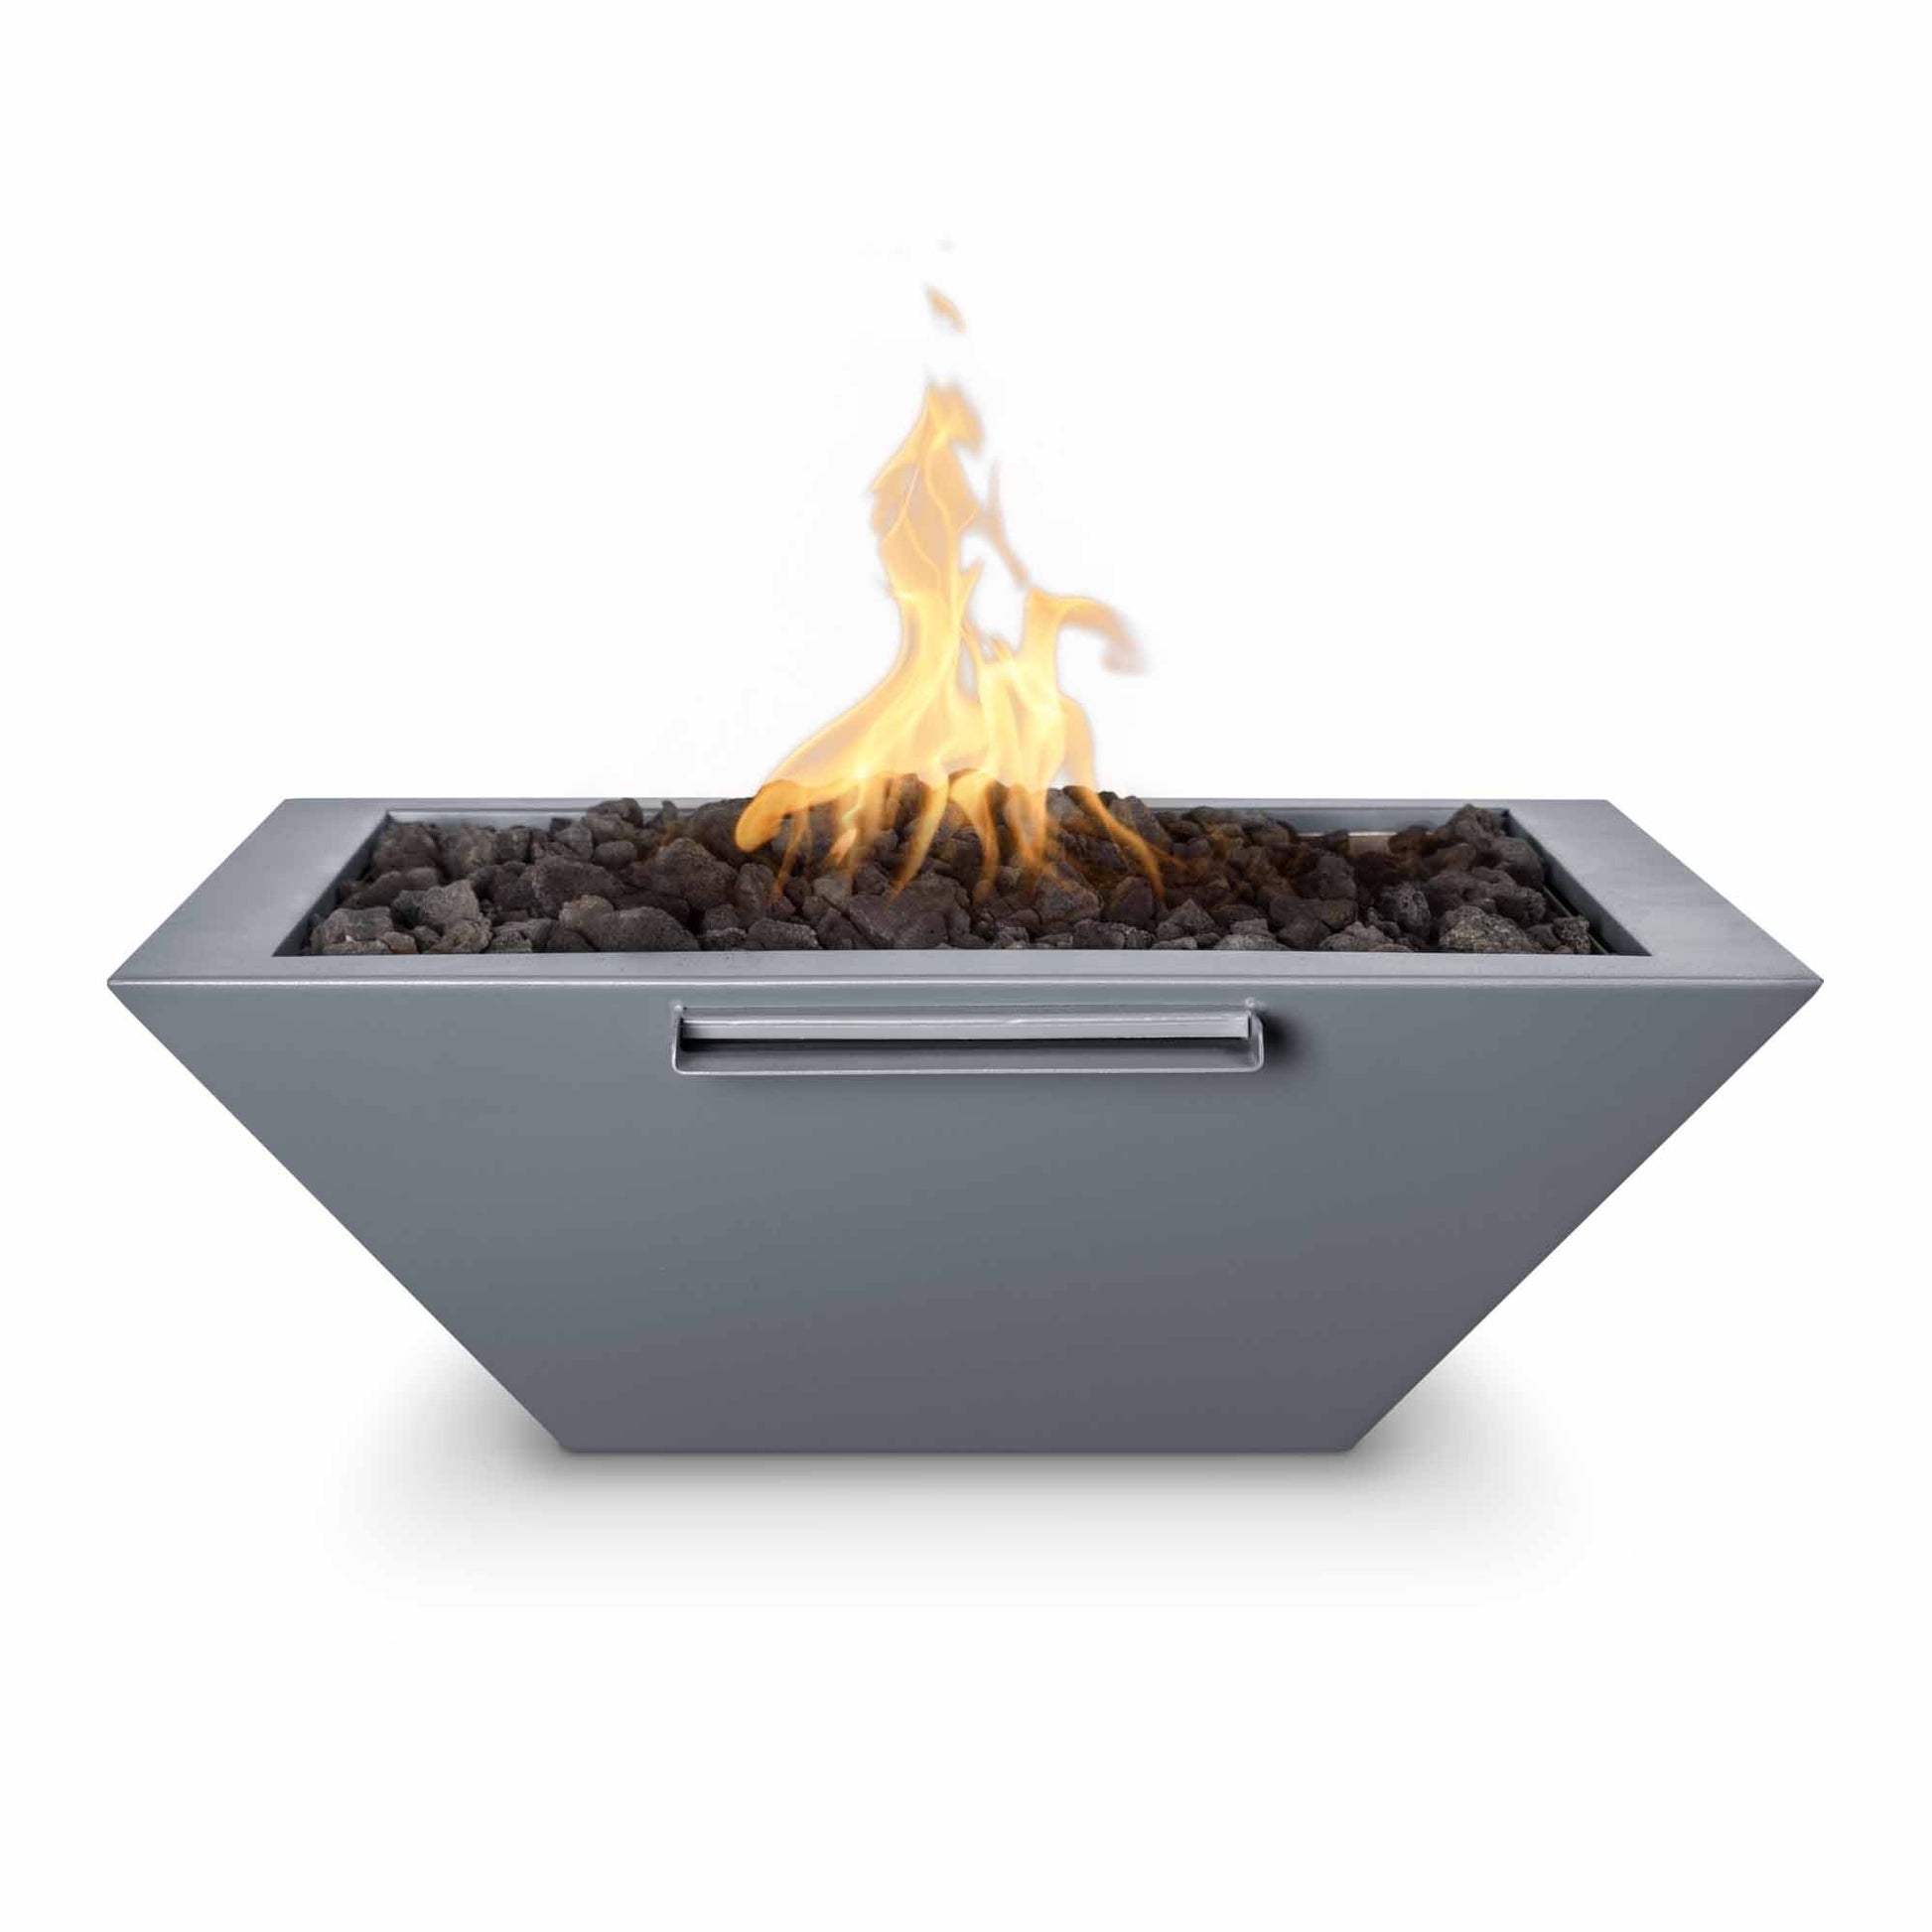 The Outdoor Plus Square Maya 30" Copper Vein Powder Coated Metal Liquid Propane Fire Bowl with Match Lit with Flame Sense Ignition